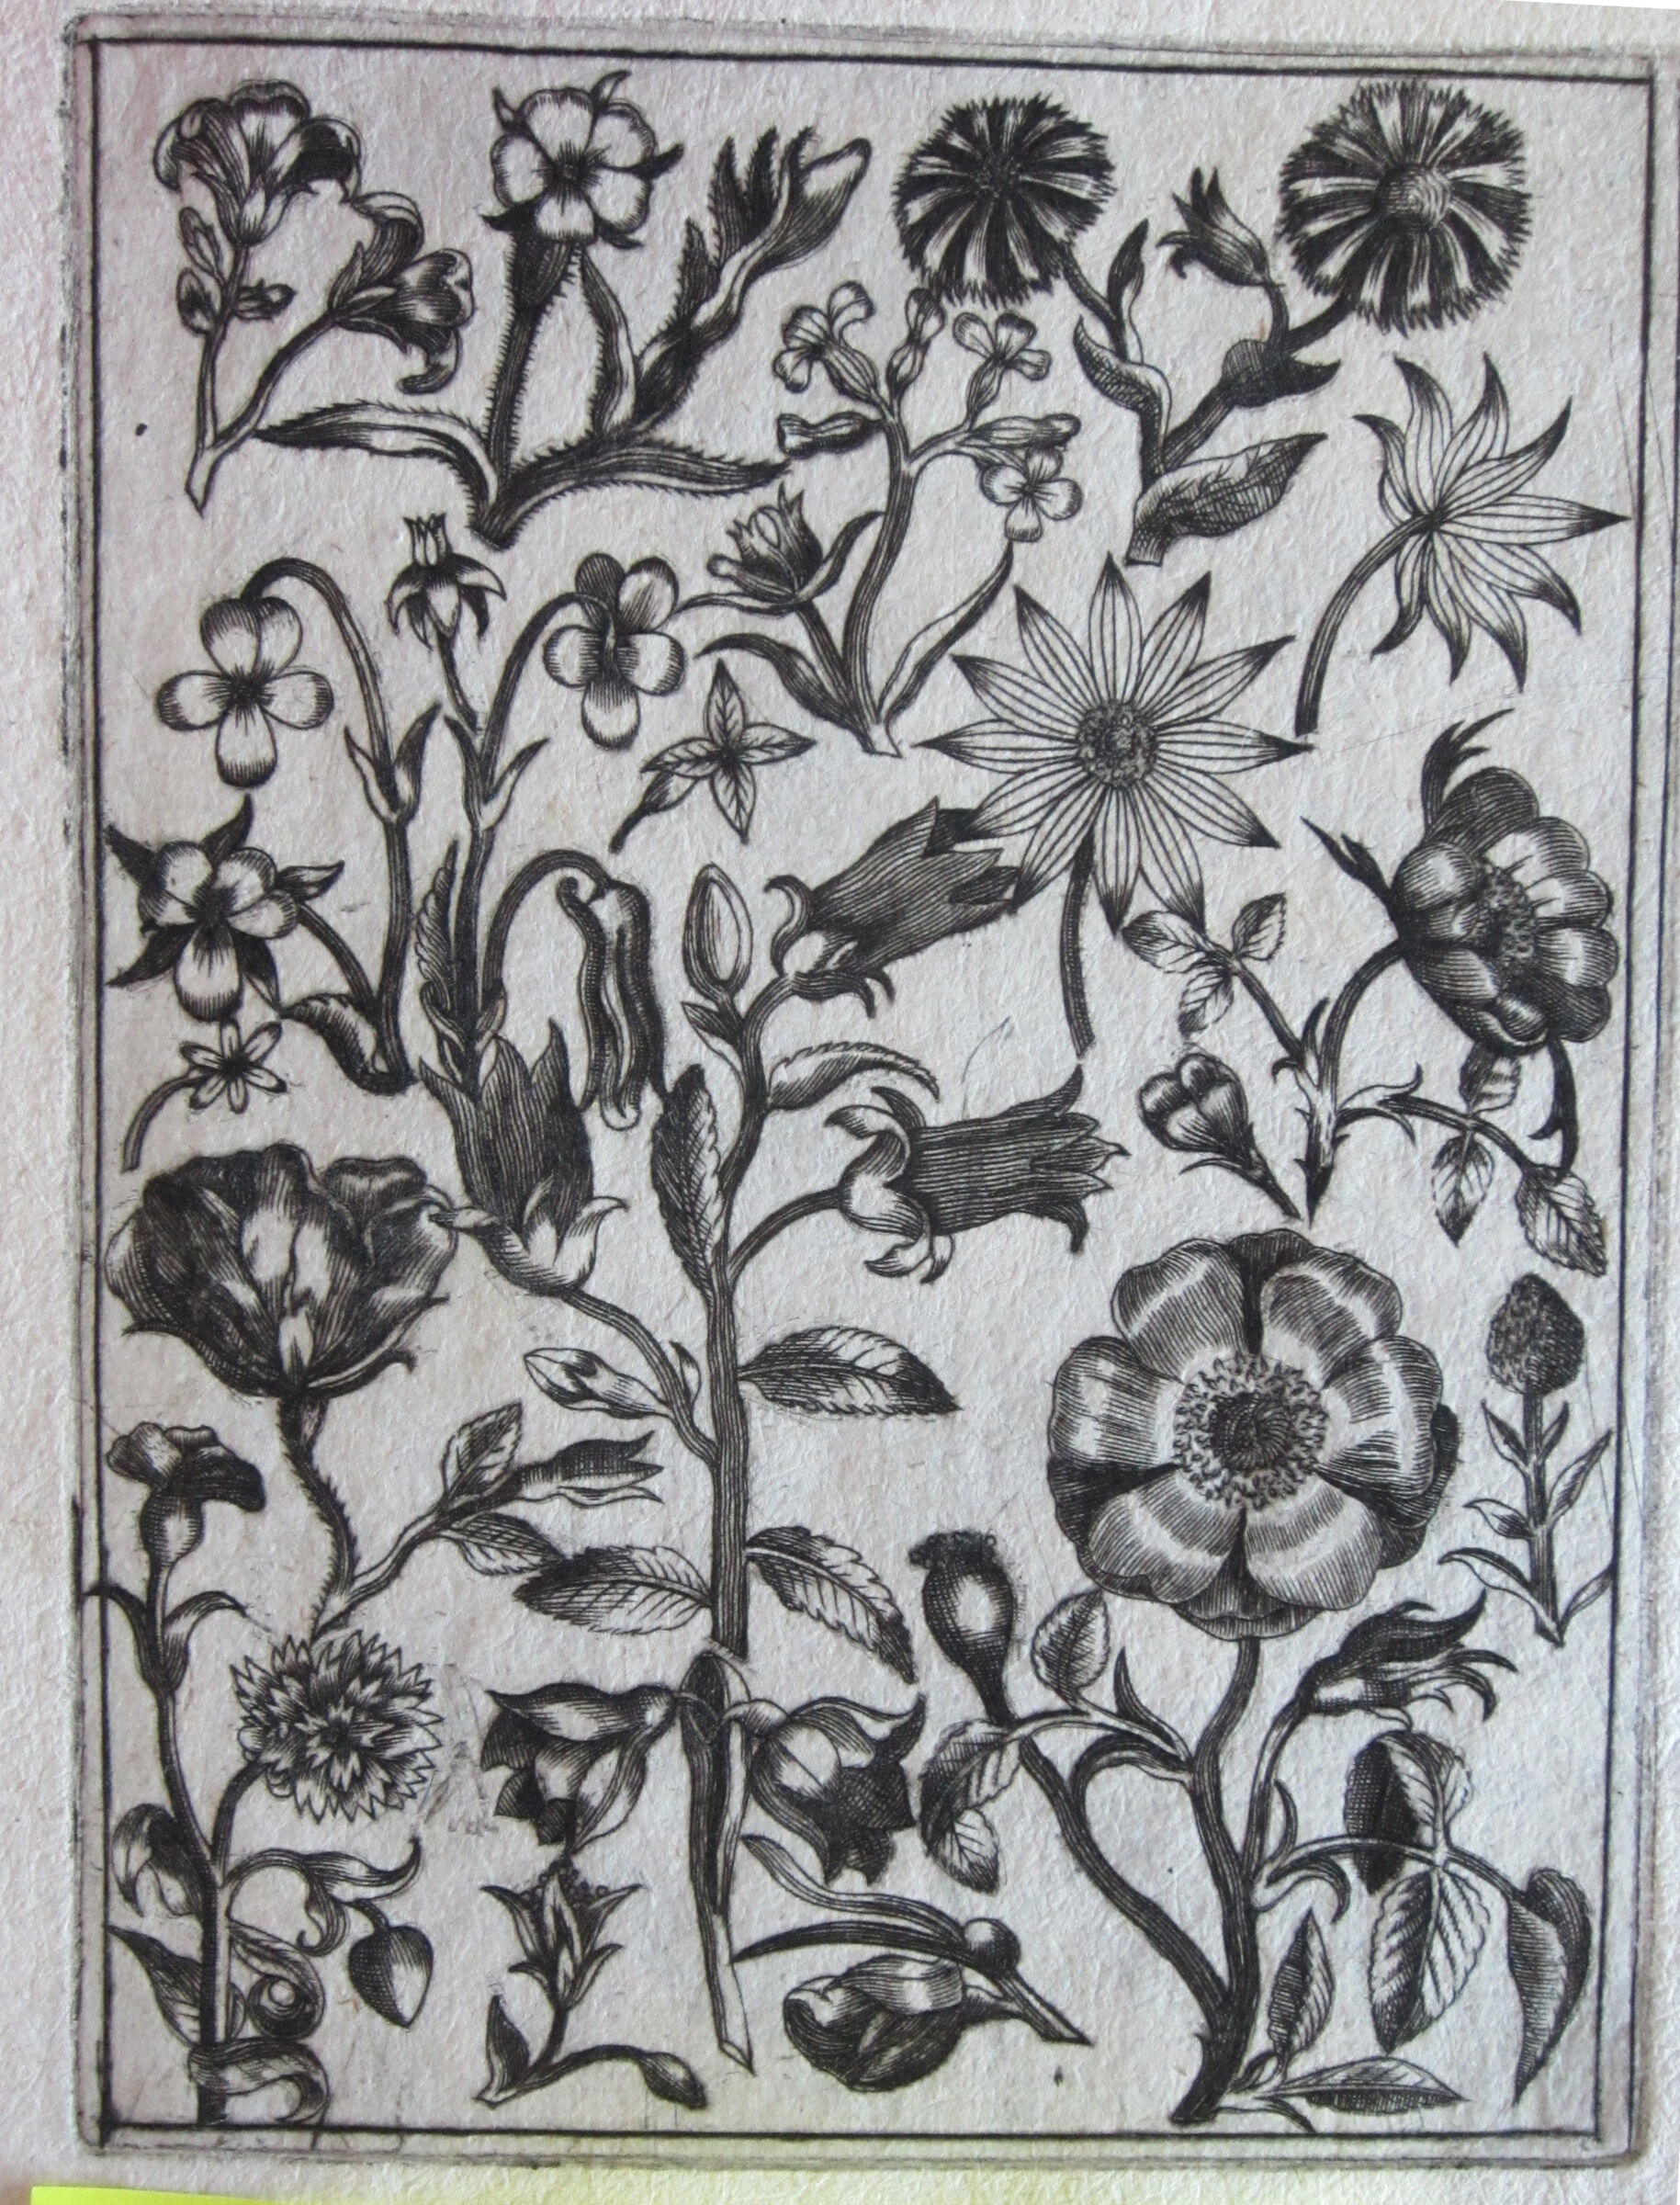 Flowers, With A Thornless Rose At The Lower Right